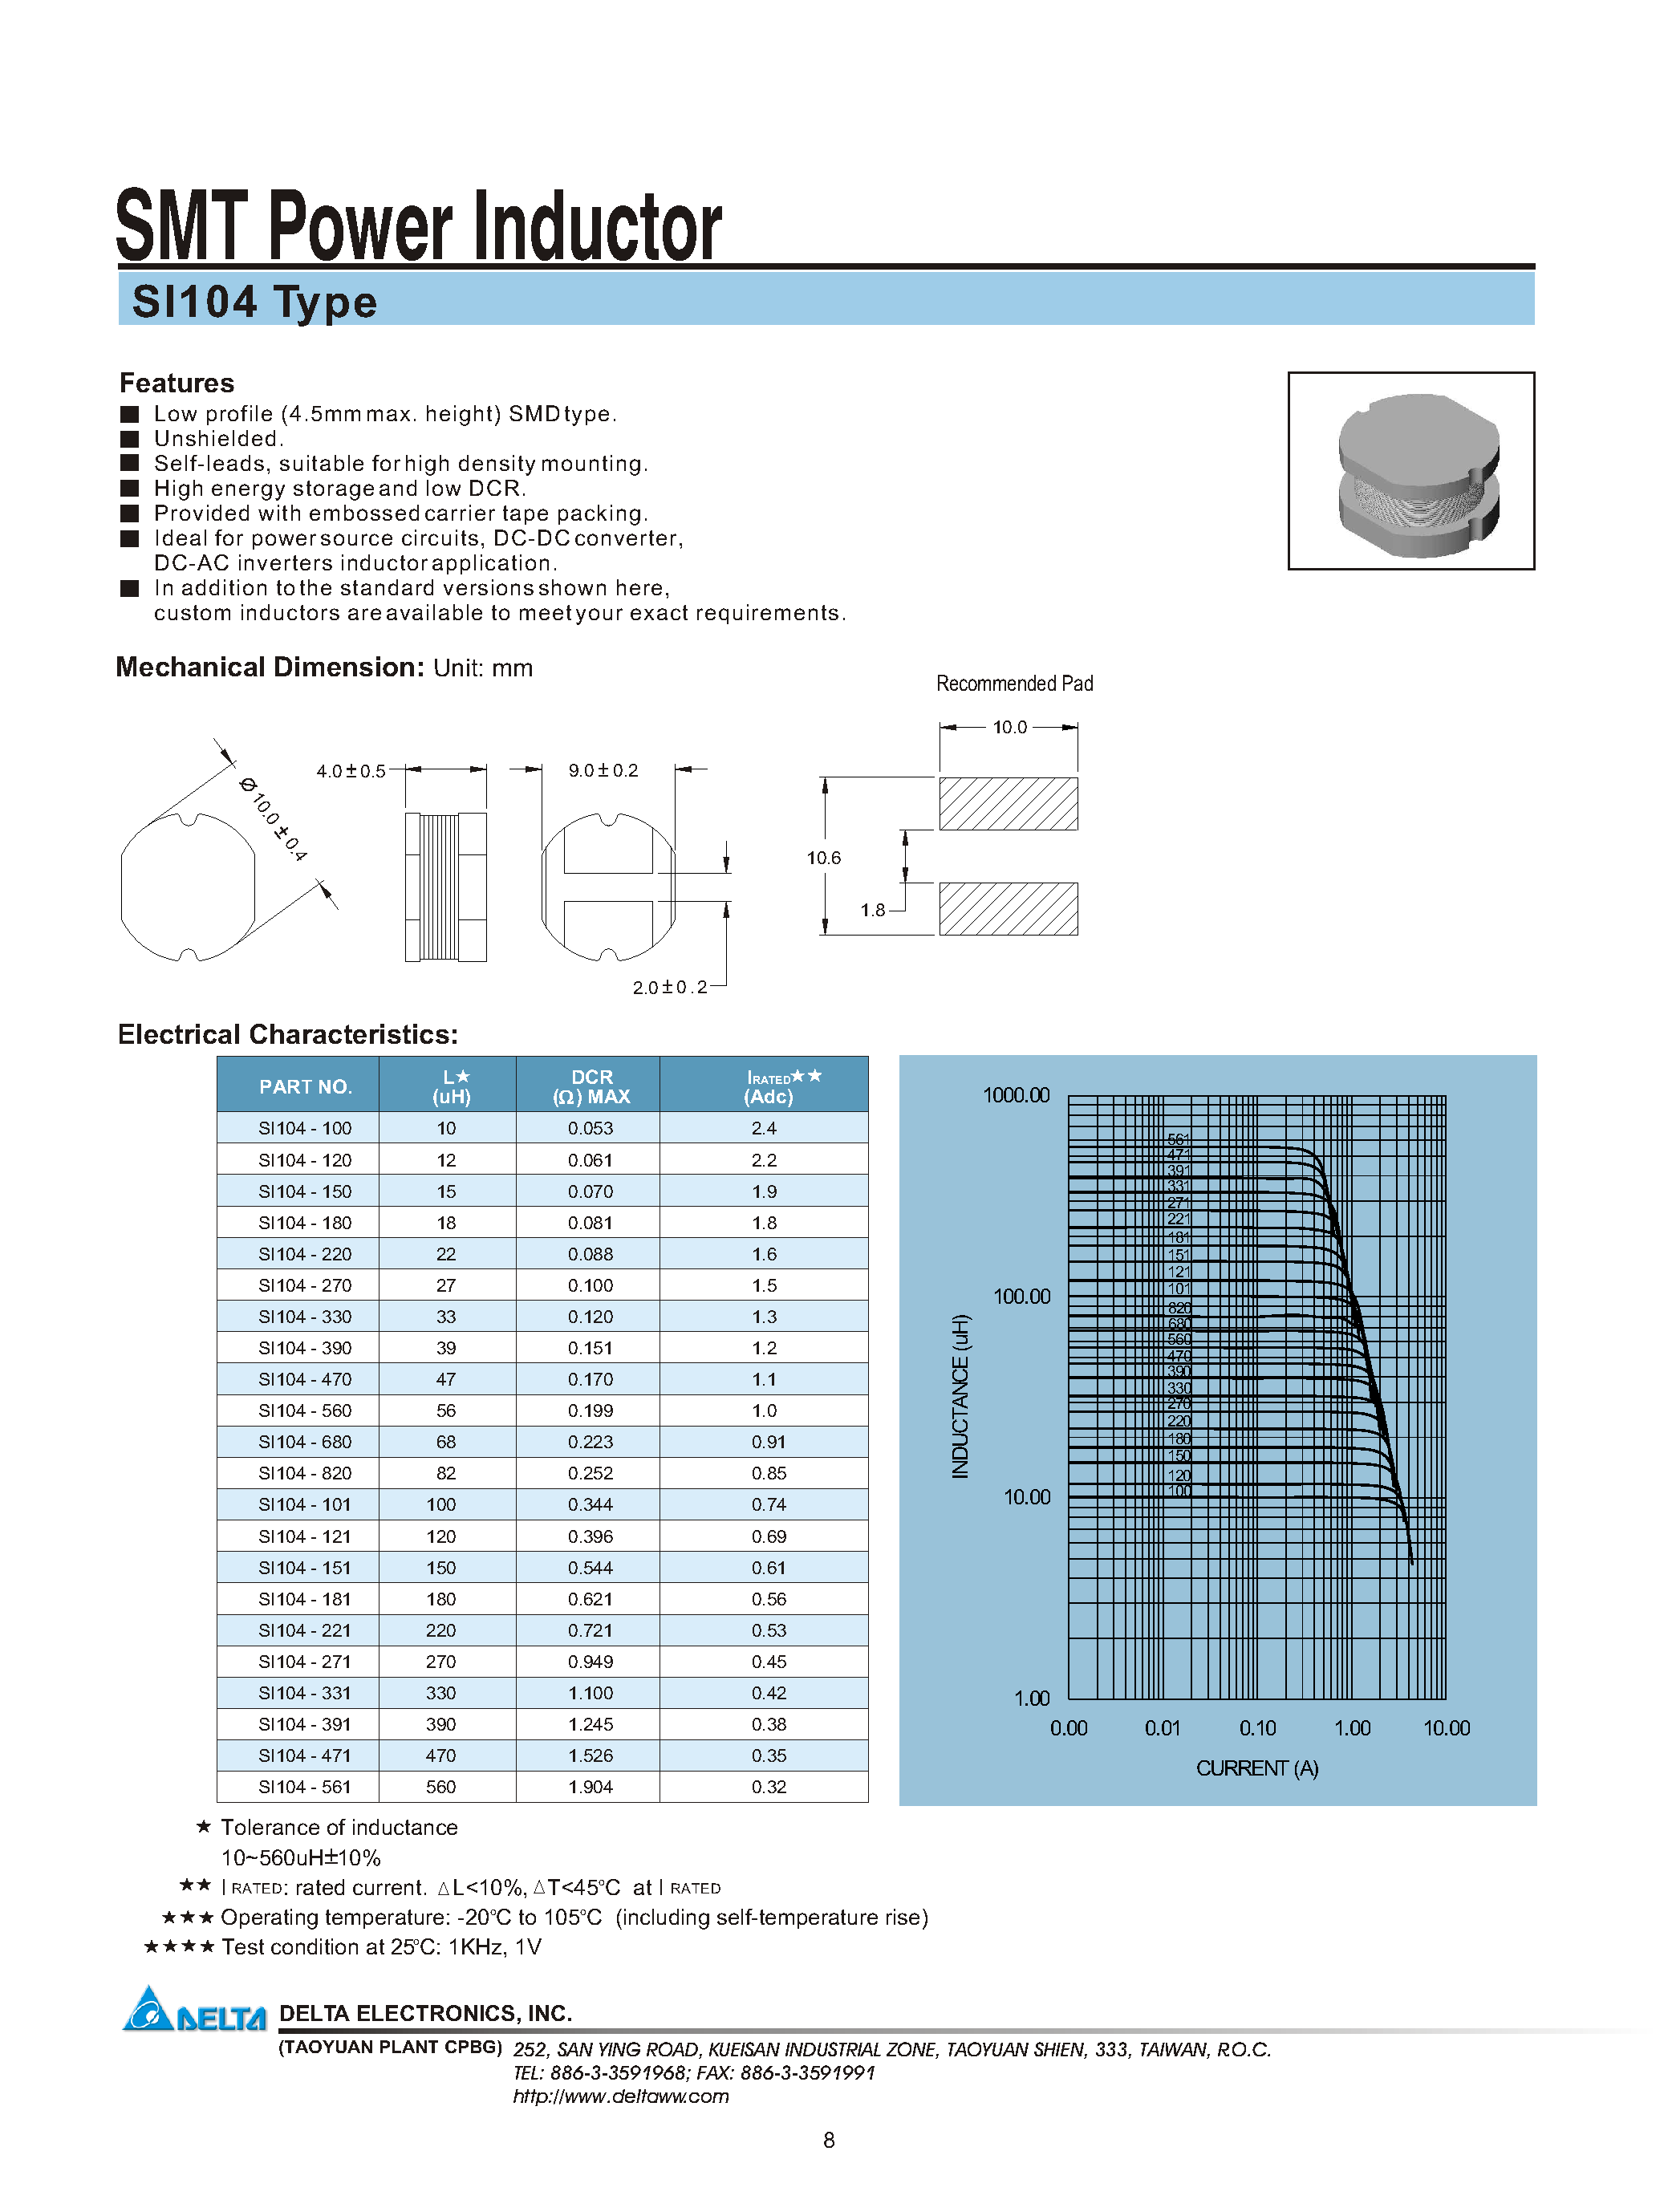 Datasheet SI104-120 - SMT Power Inductor page 1